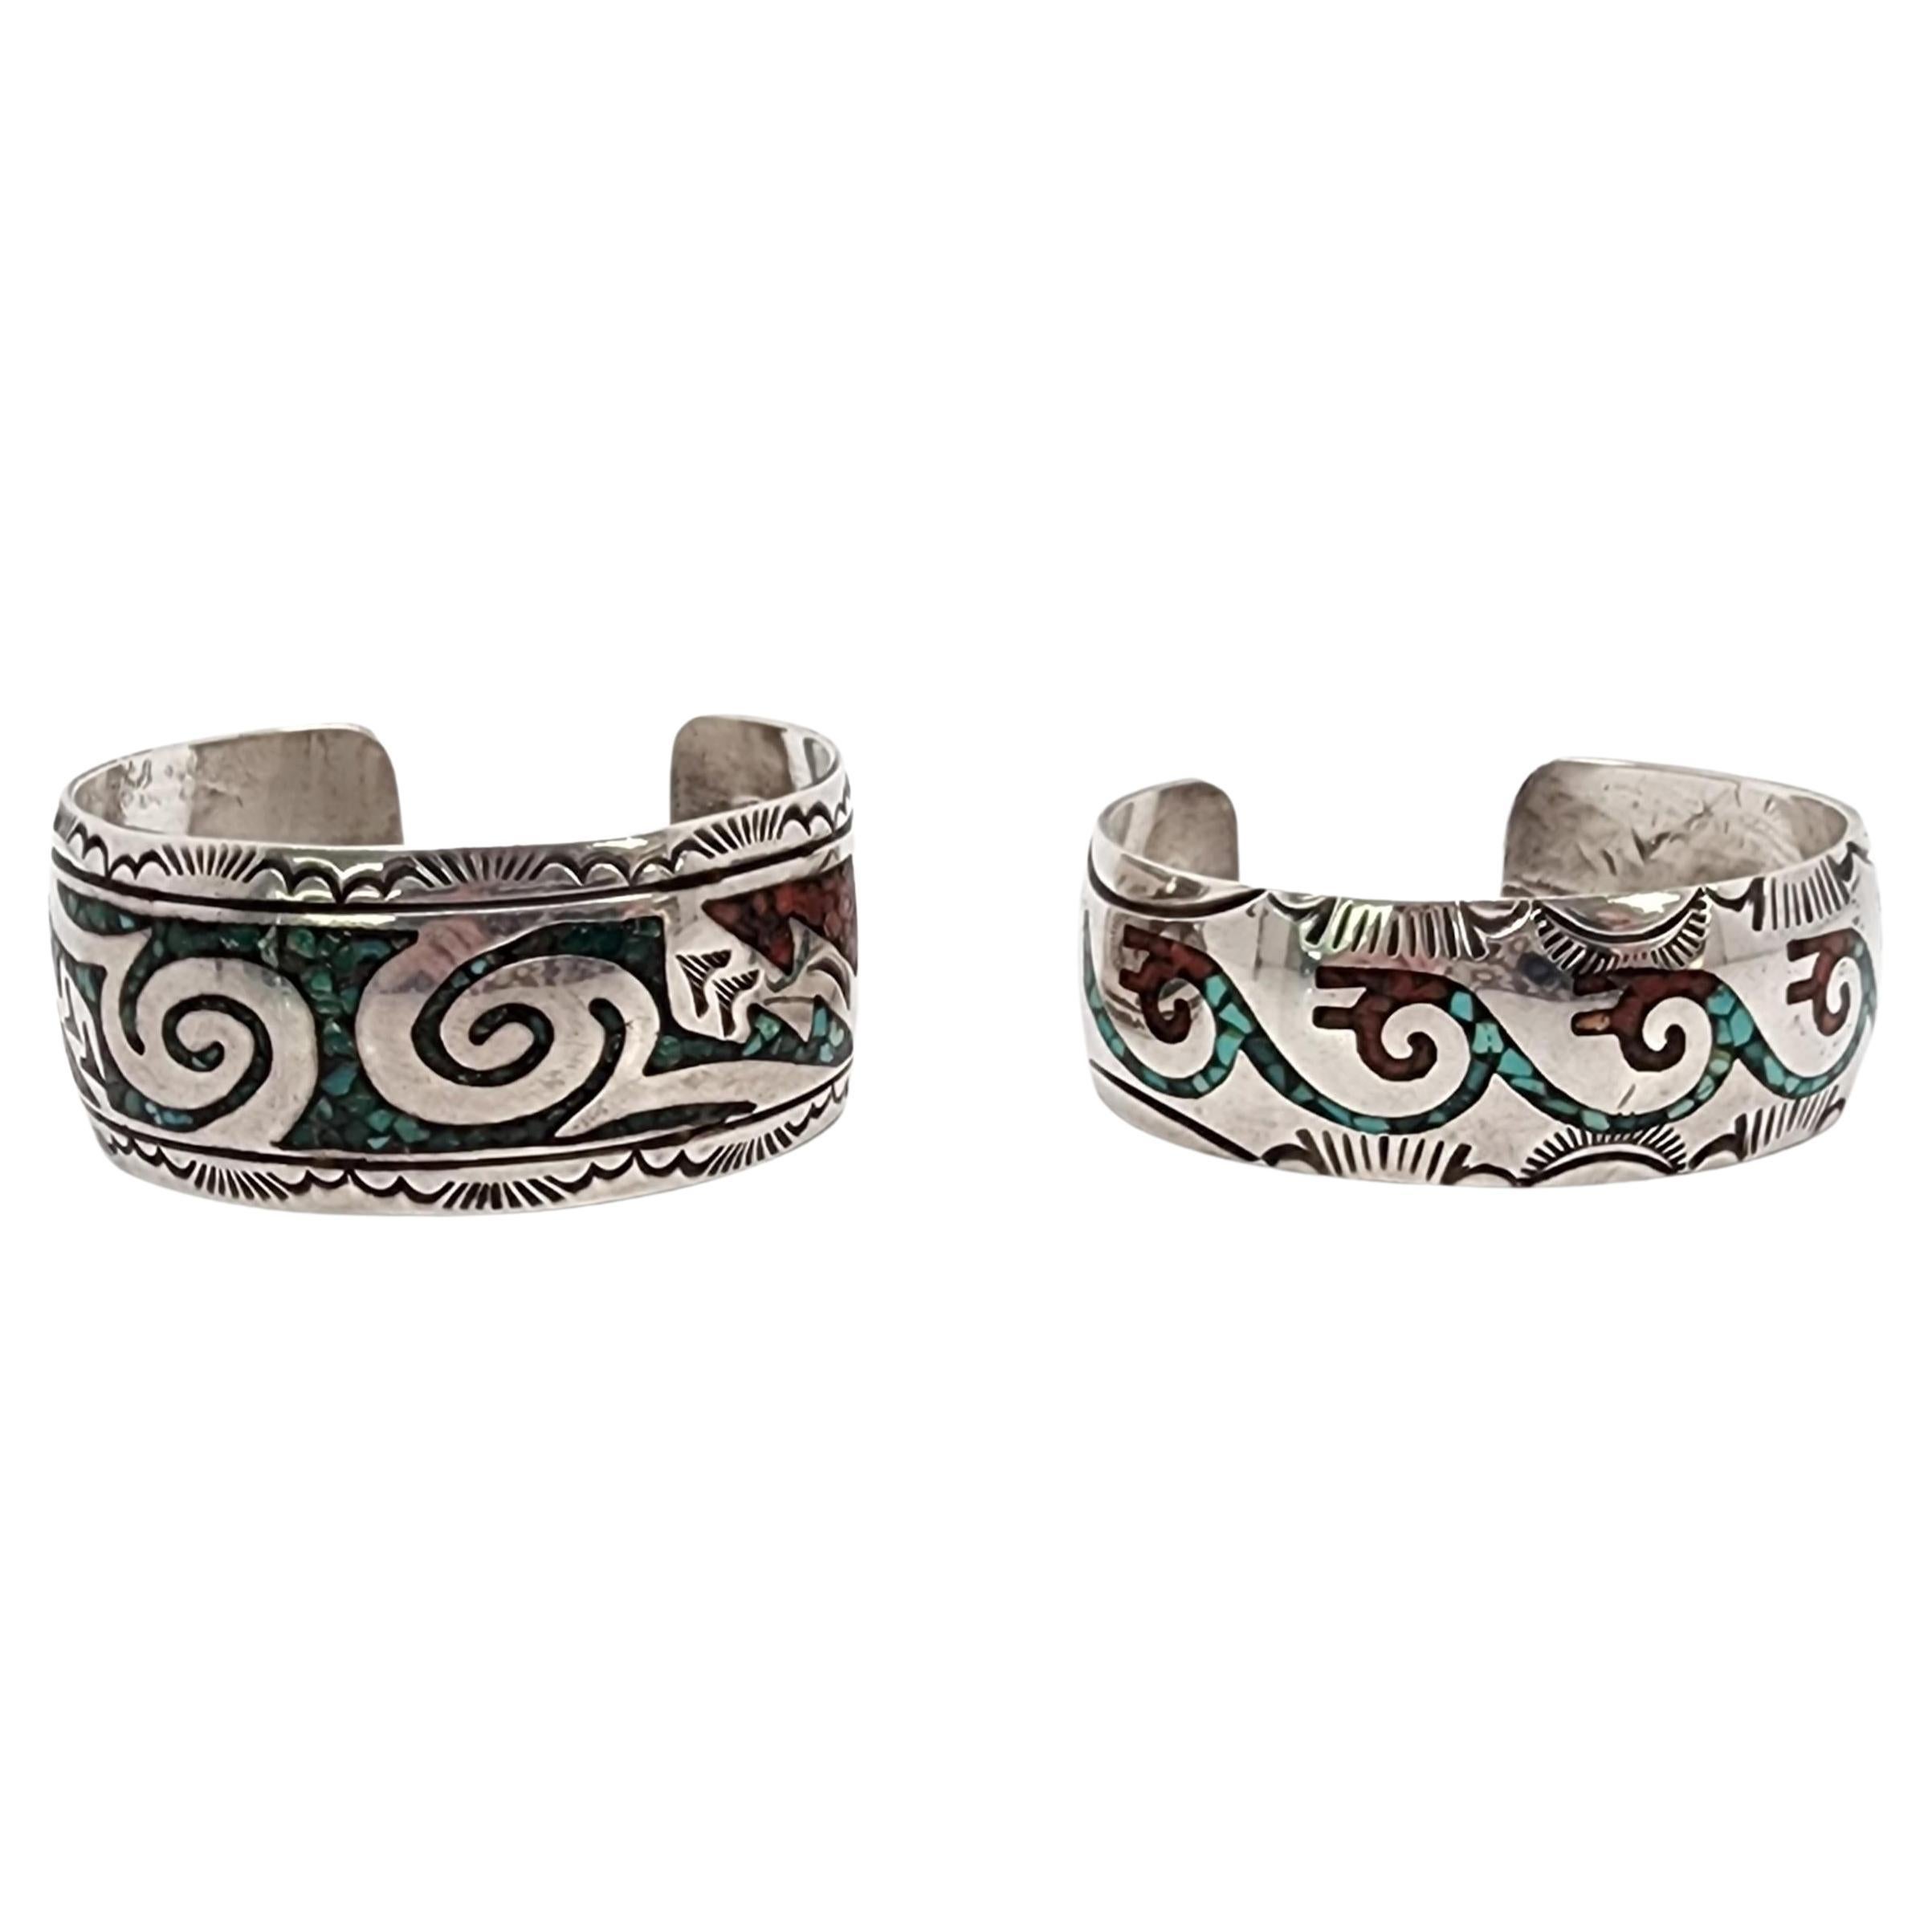 Set of 2 Native American Crushed Turquoise Silver Cuff Bracelets #15358 For Sale